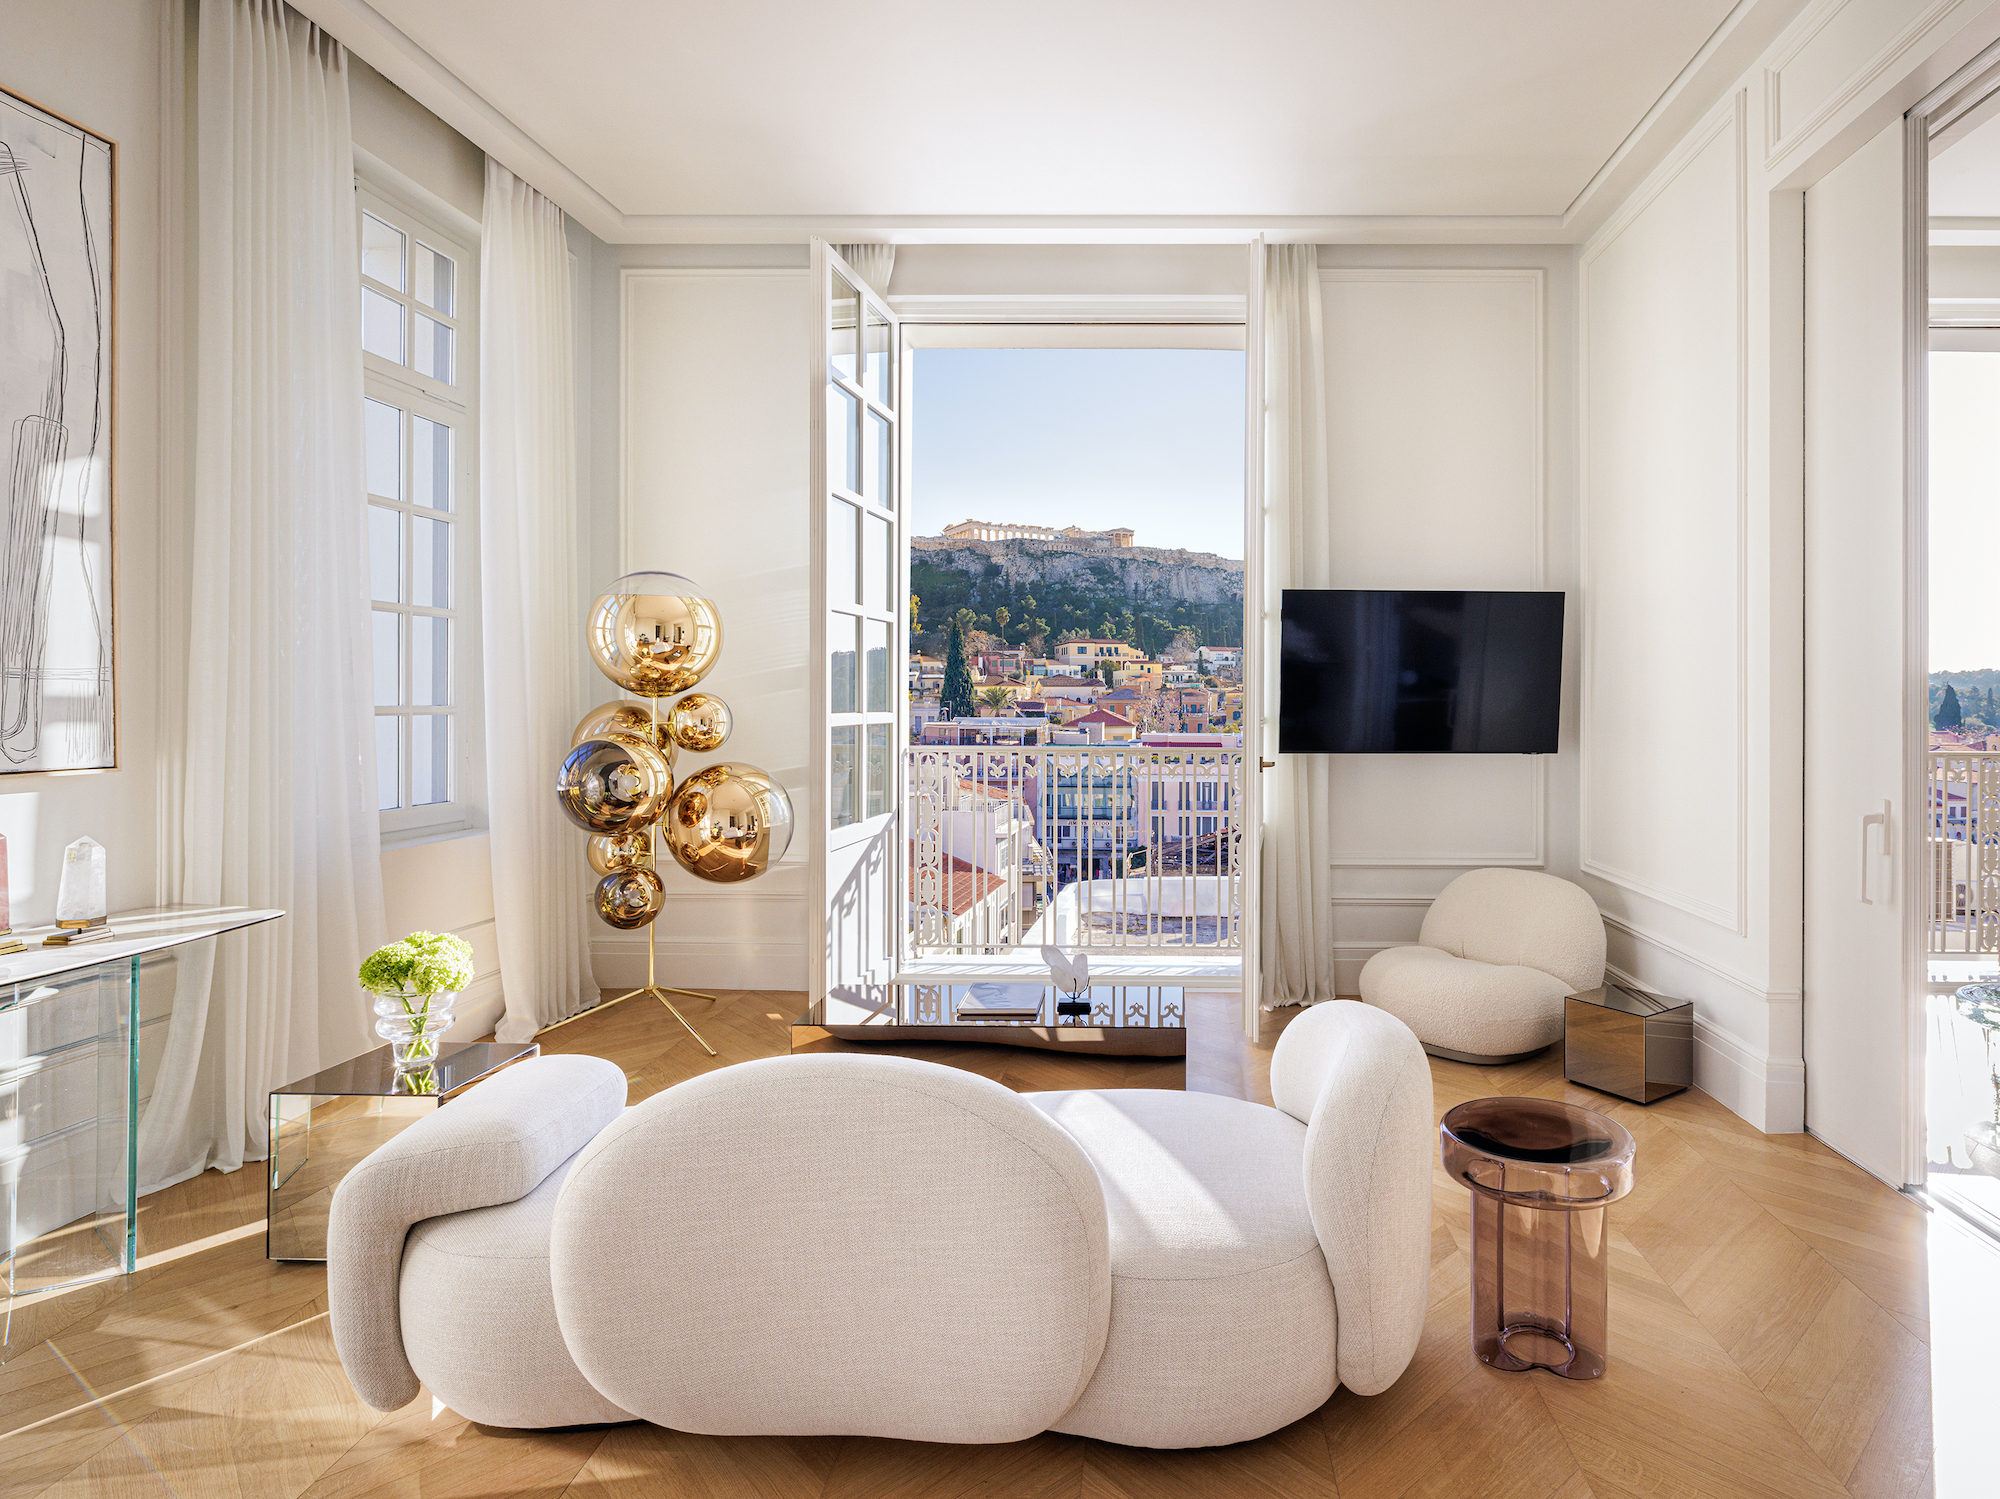 The Dolli: A Design-Focused Hotel With History (Including Acropolis Views)